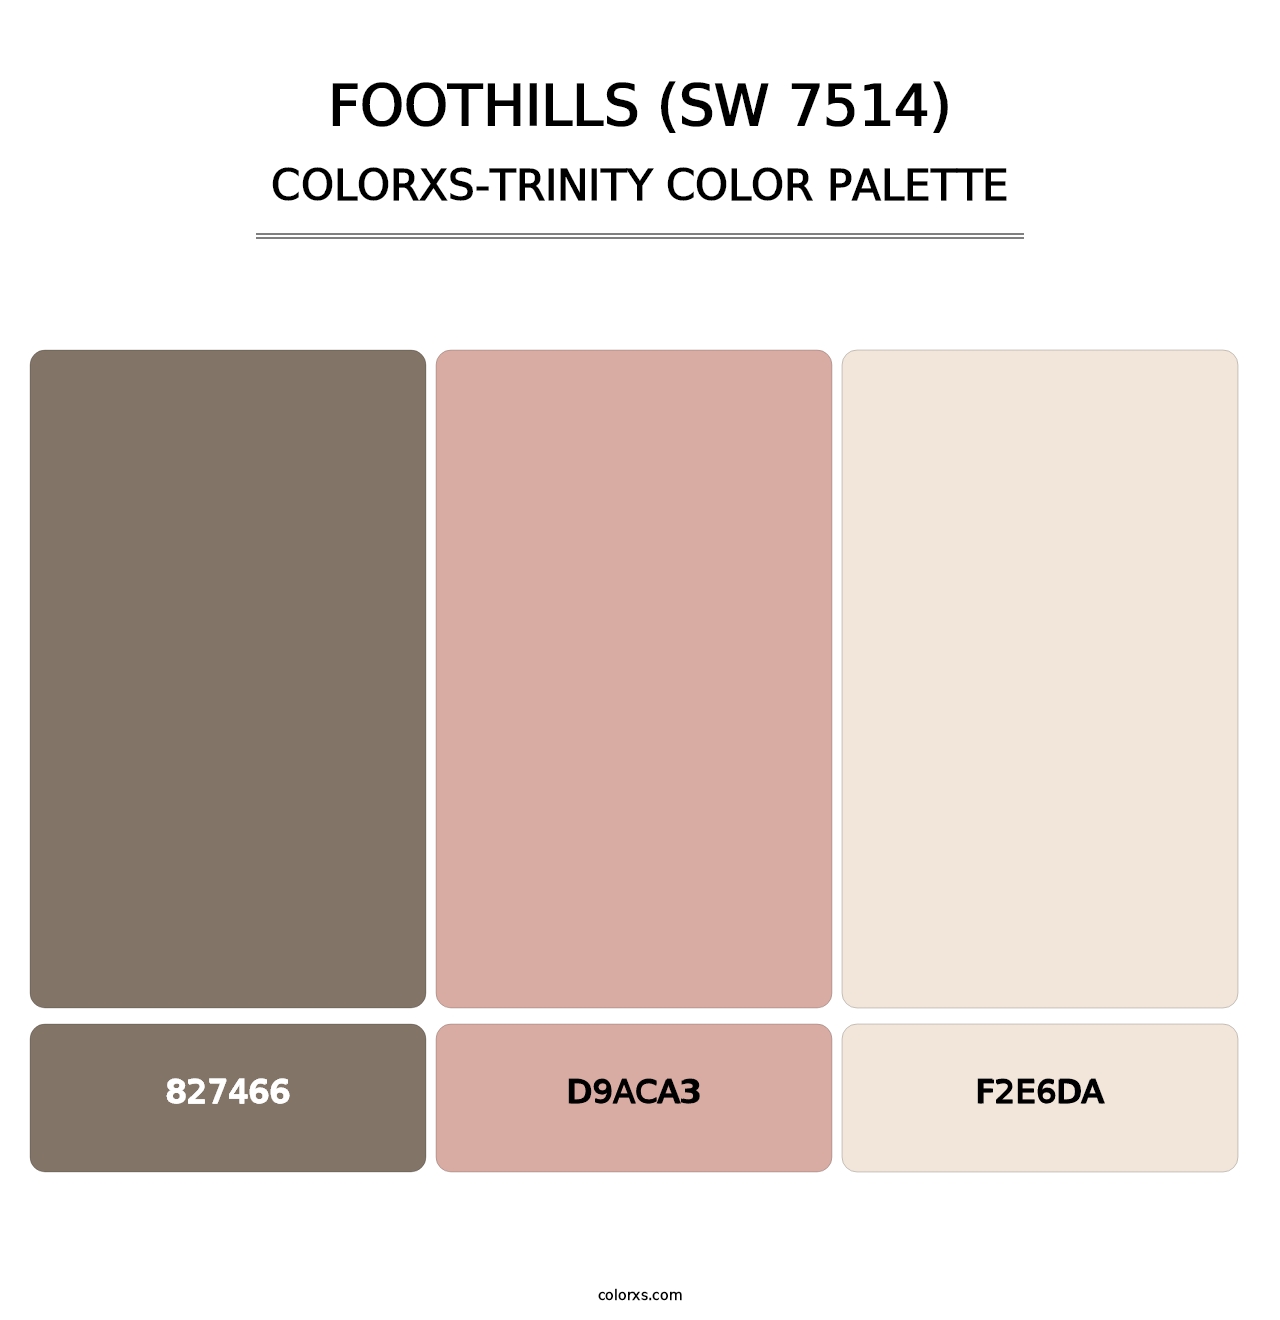 Foothills (SW 7514) - Colorxs Trinity Palette